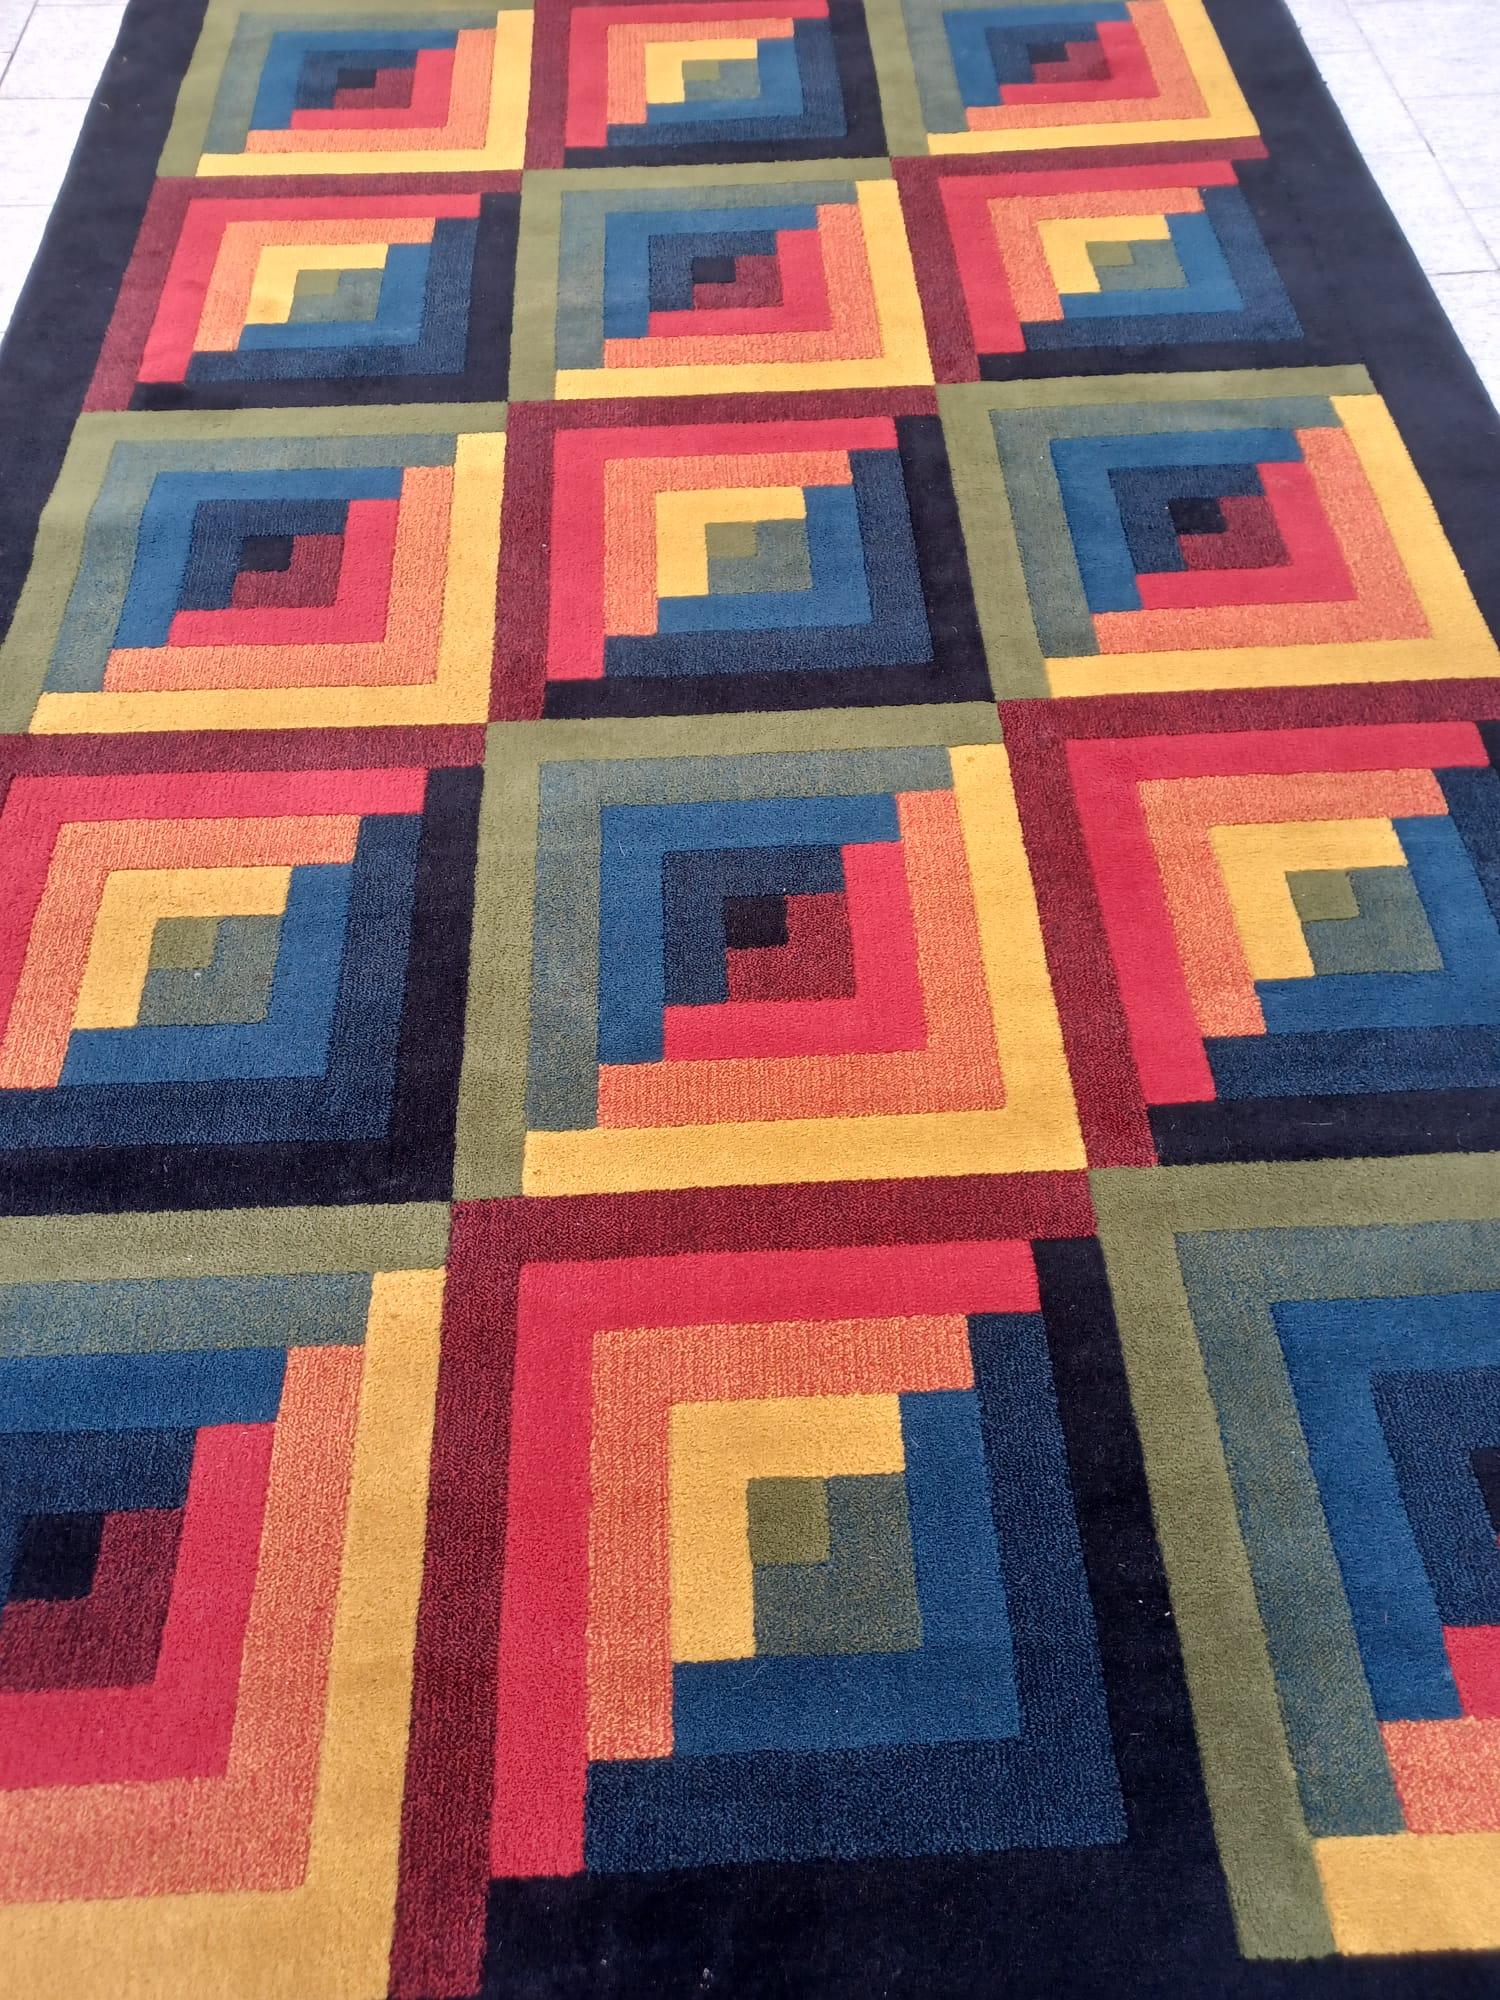 This Ottavio Missoni vintage rug was made in the 80s in pure virgin wool by the company T&J Vestor, founded in 1921 by Rosita Missoni, and now acquired by Missoni Home.
thi beautiful optical rug has geometric patterns that form squares with bright